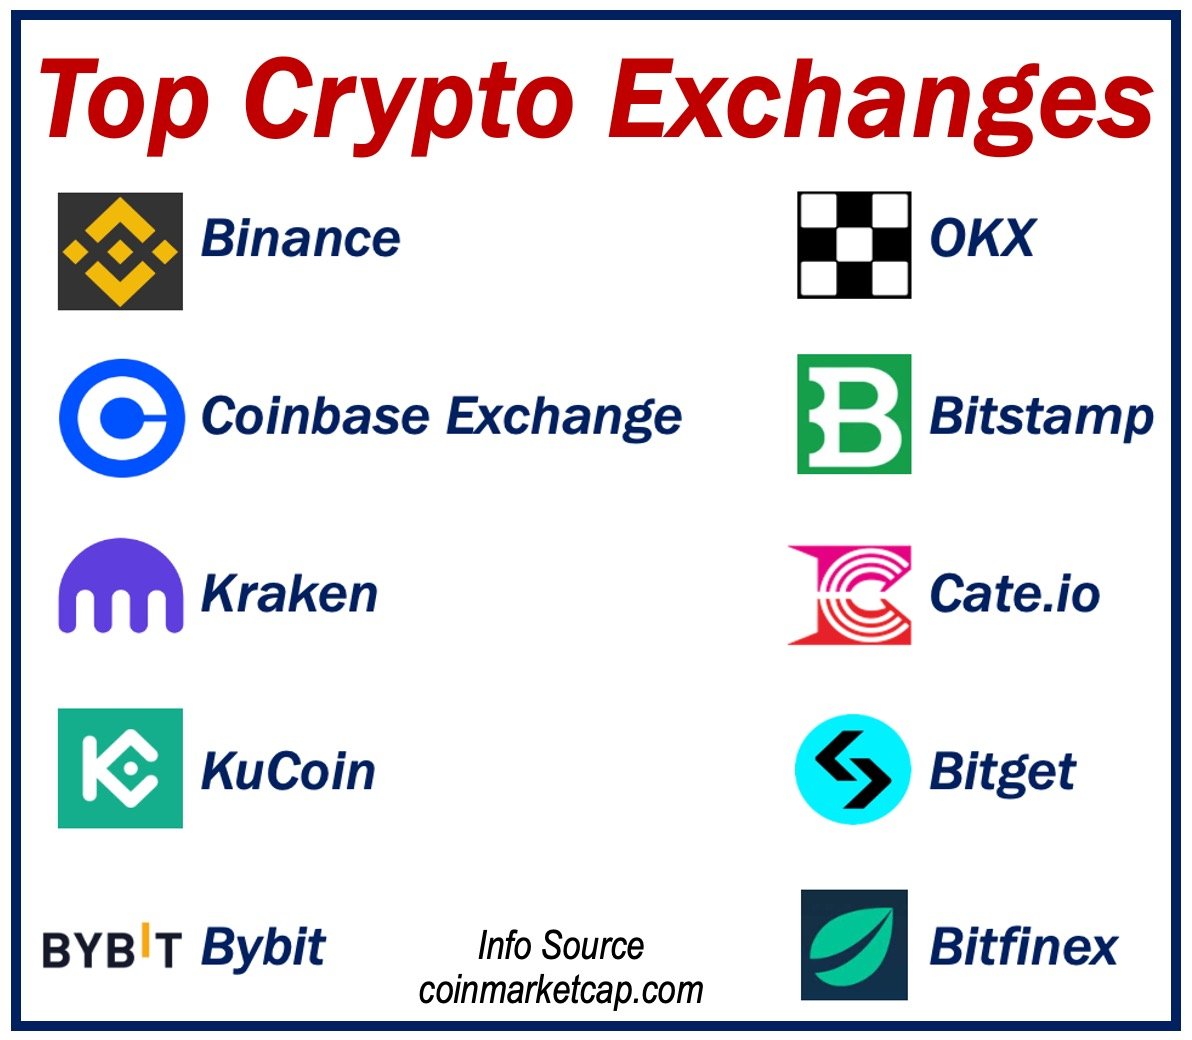 Top Cryptocurrency Exchanges list.